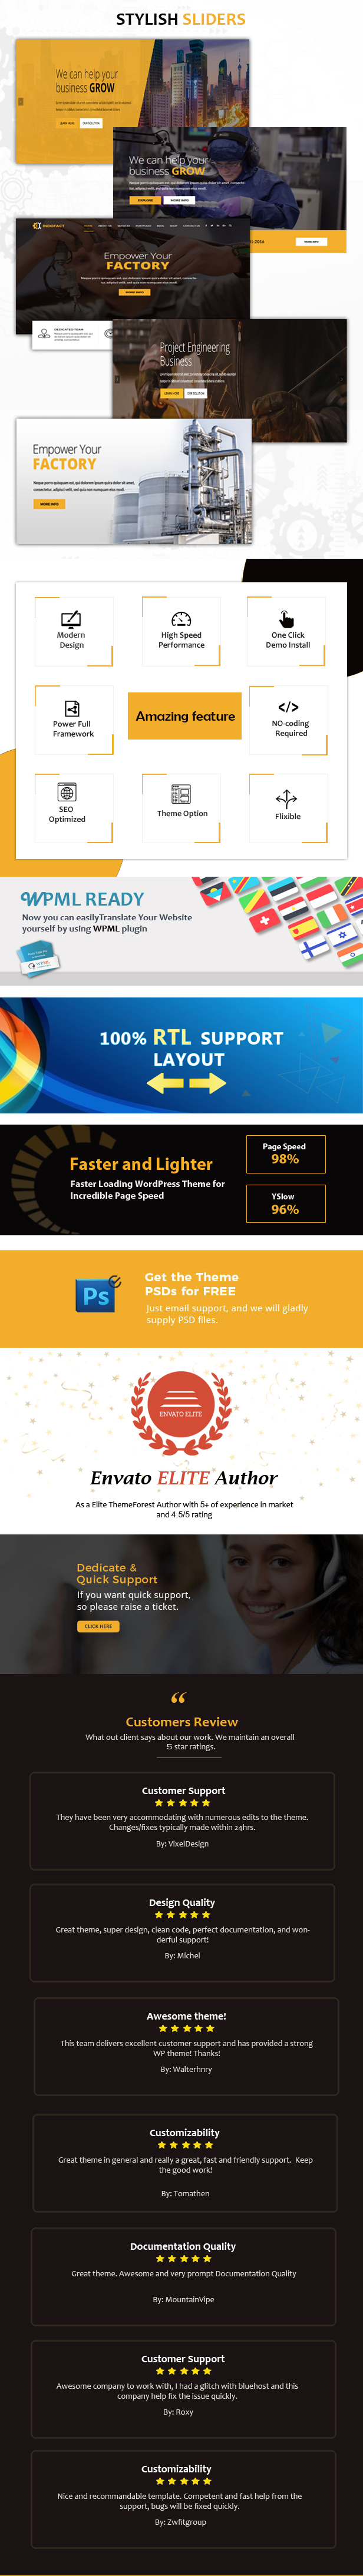 Indofact - Industry and factory WordPress Theme - 3